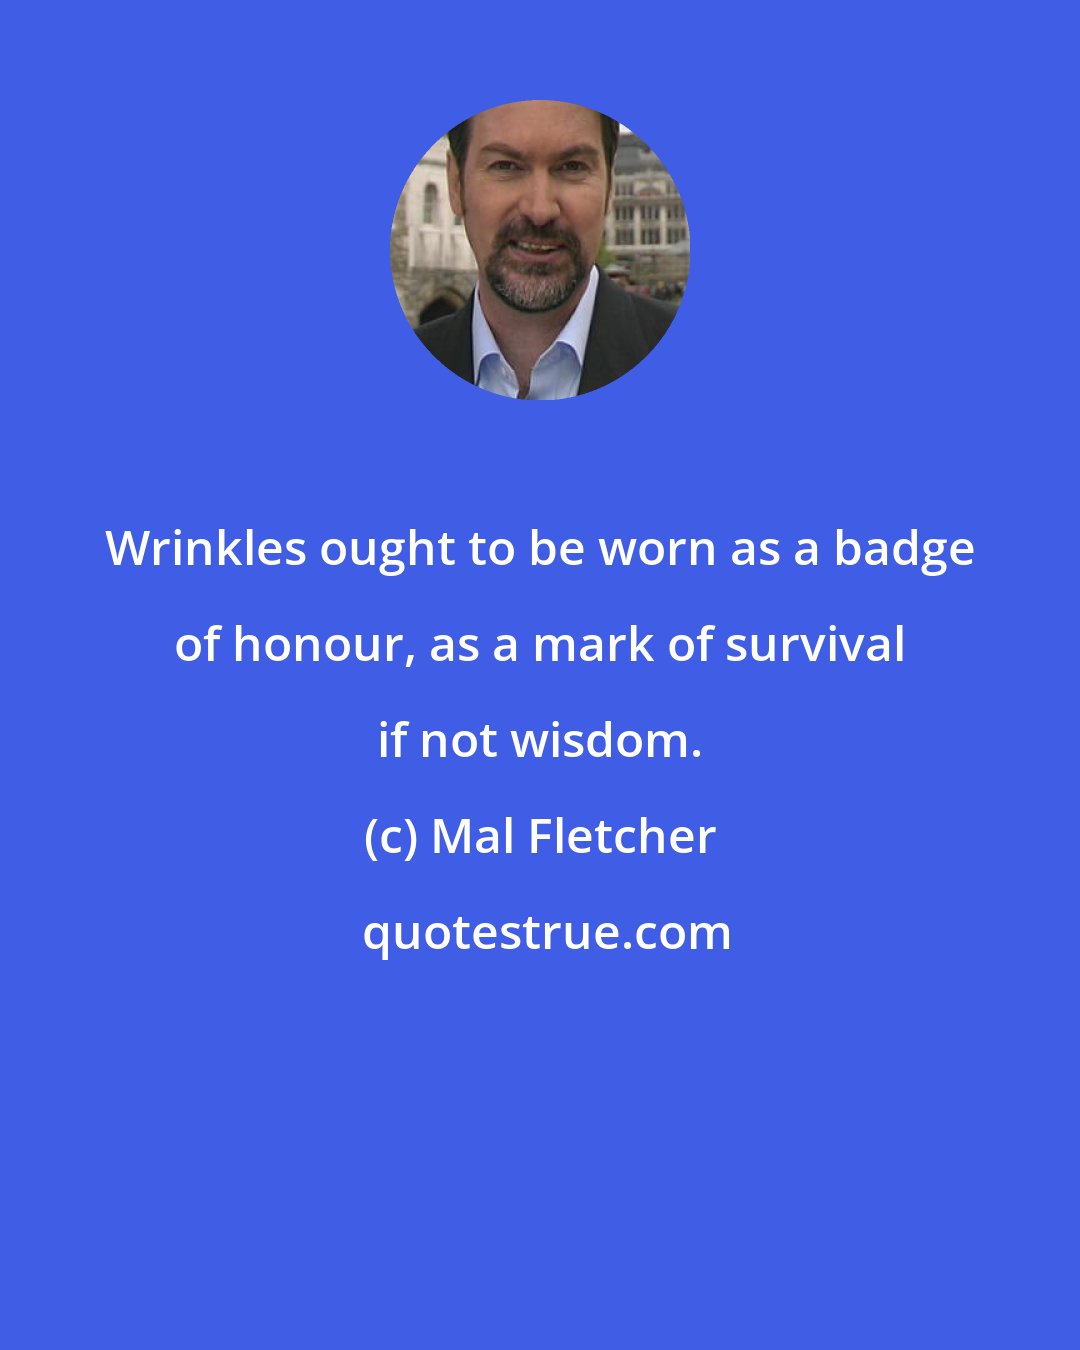 Mal Fletcher: Wrinkles ought to be worn as a badge of honour, as a mark of survival if not wisdom.